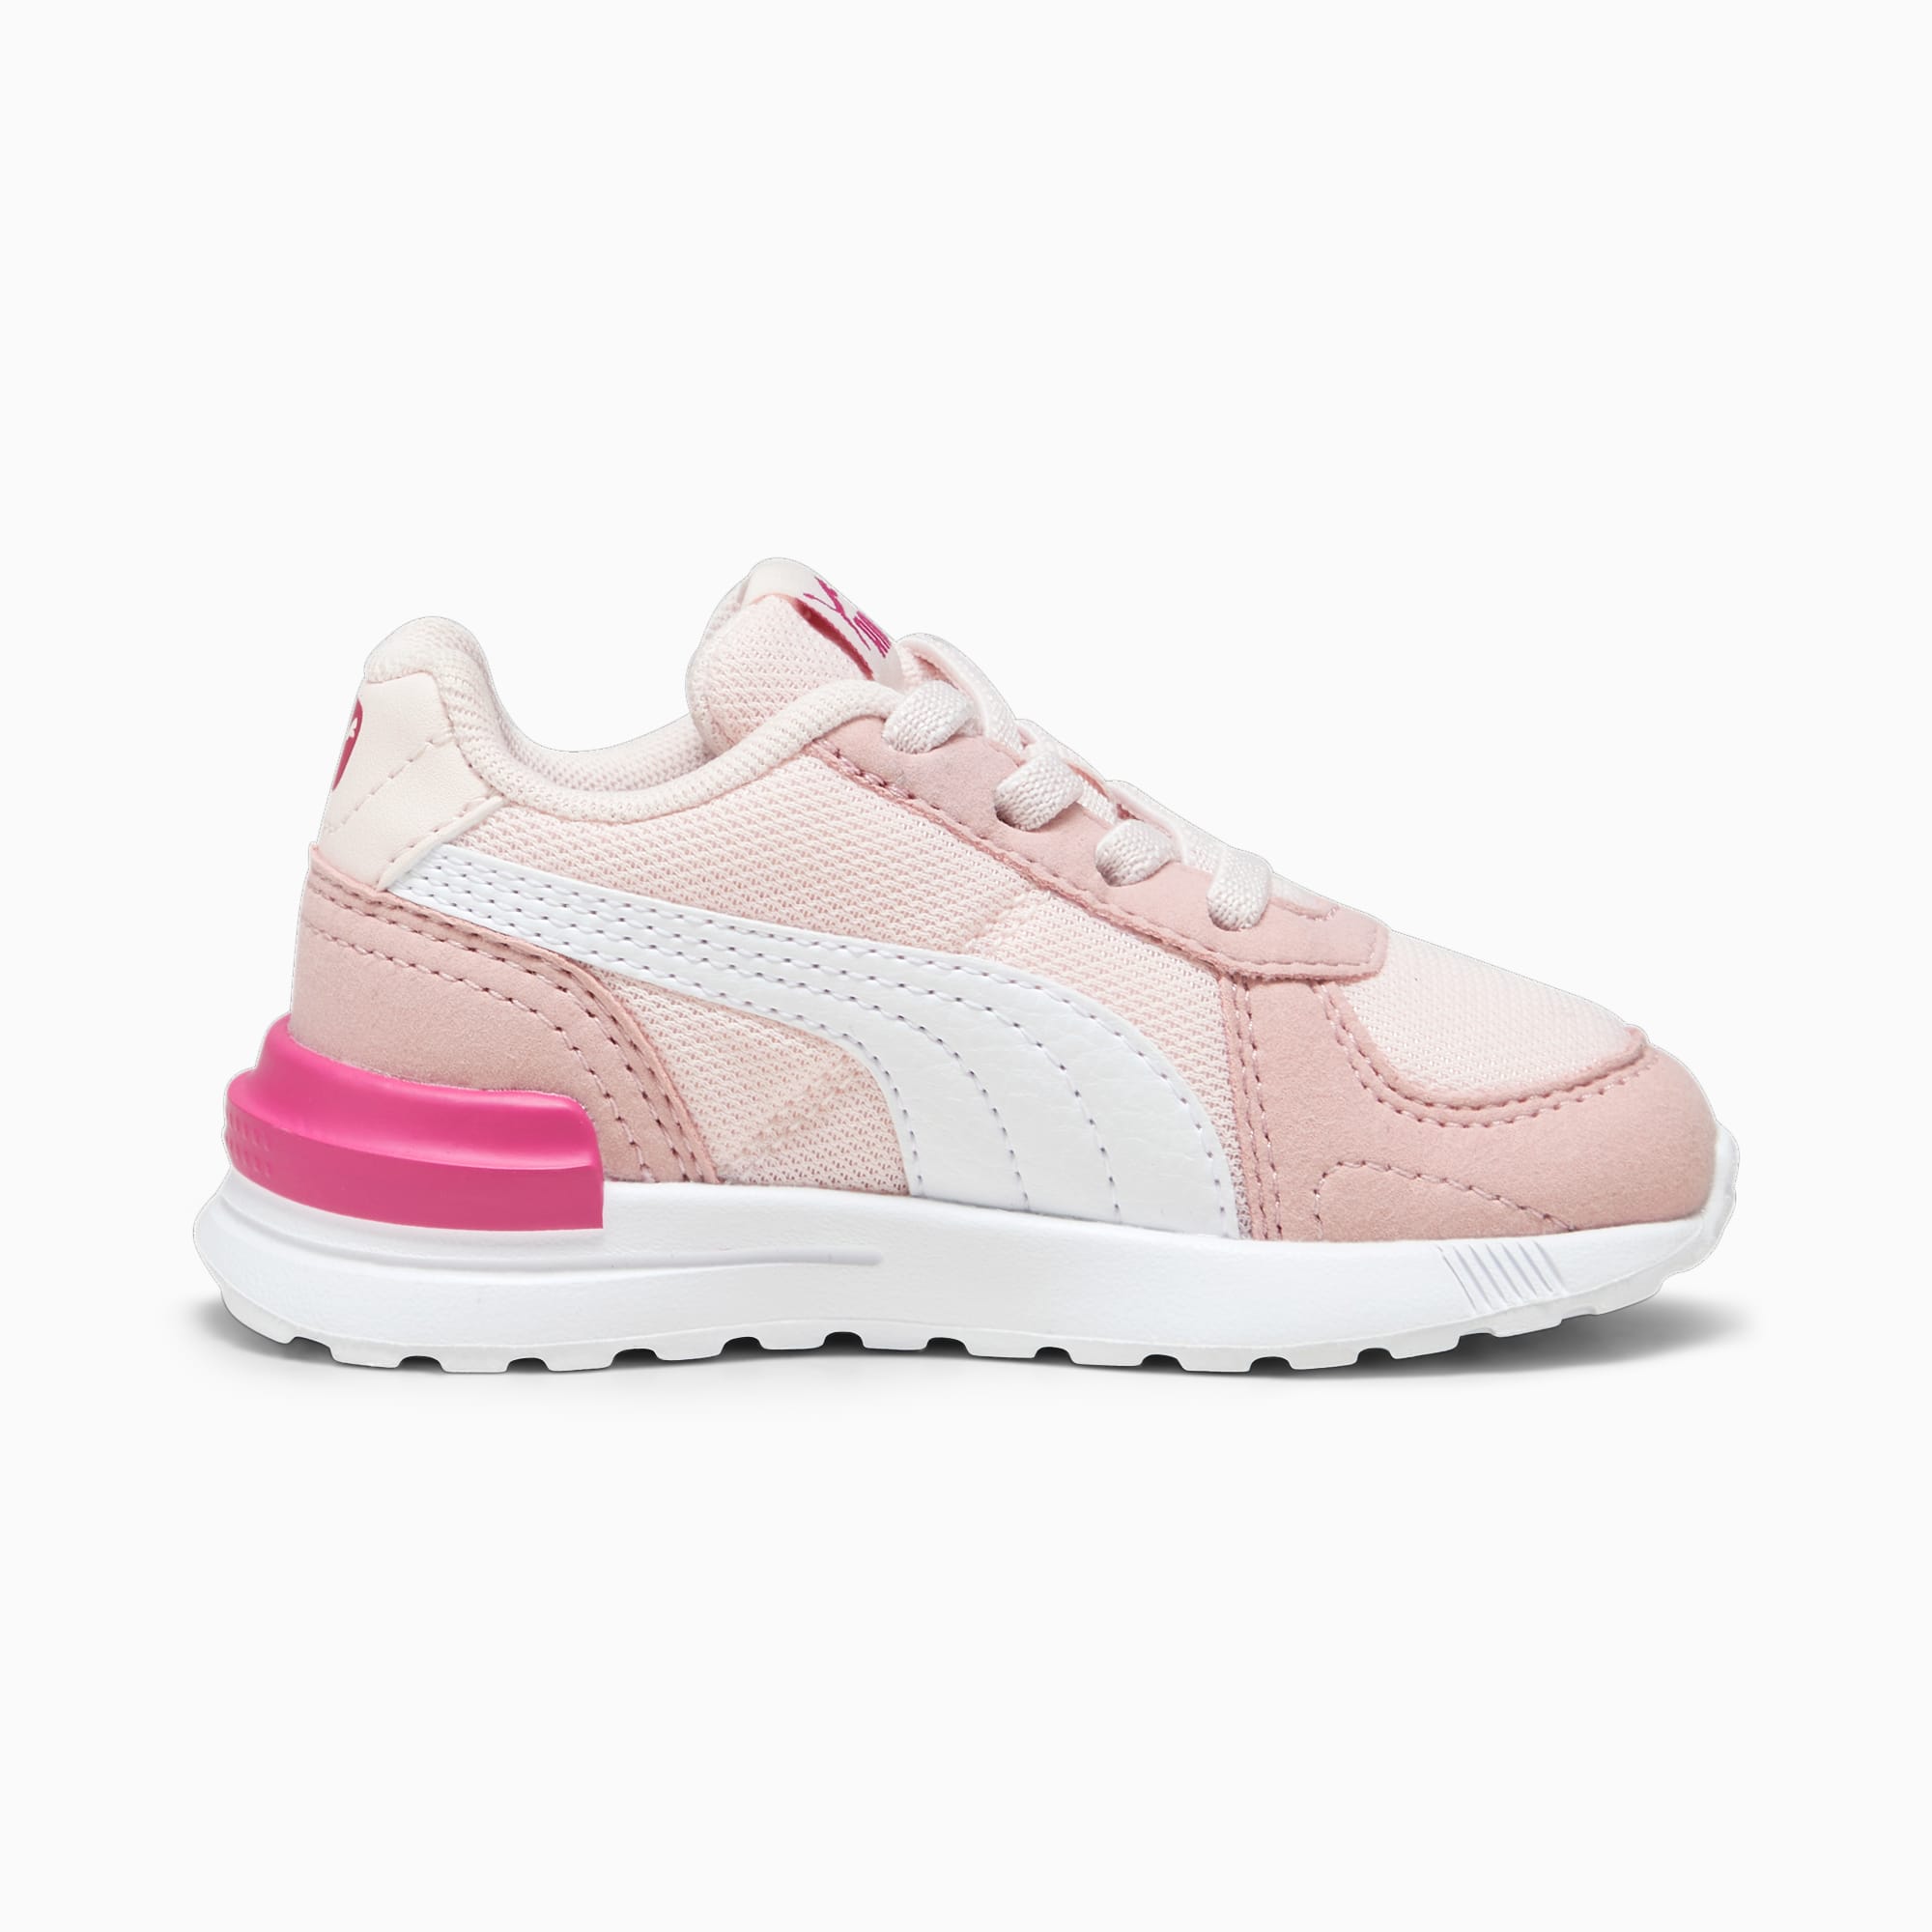 PUMA Graviton AC Babies' Trainers, Frosty Pink/White/Future Pink, Size 19, Shoes